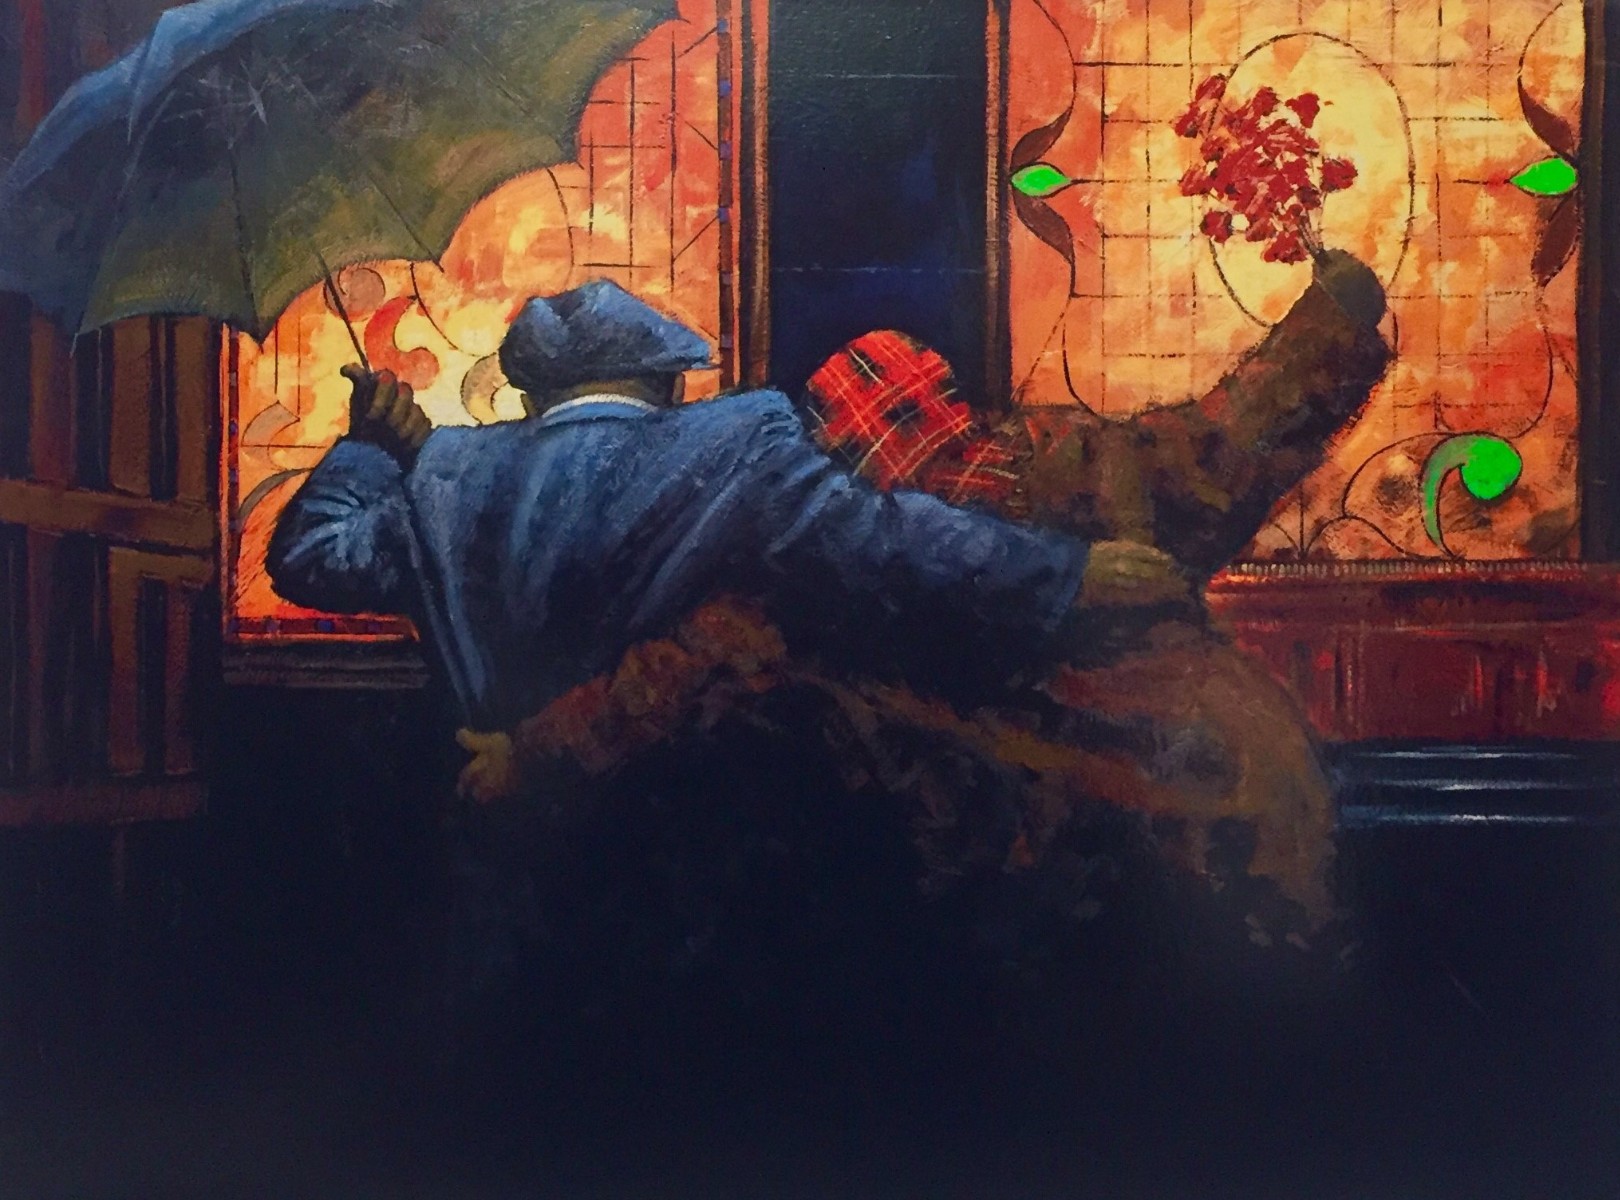 Like Moths to a Flame by Alexander Millar